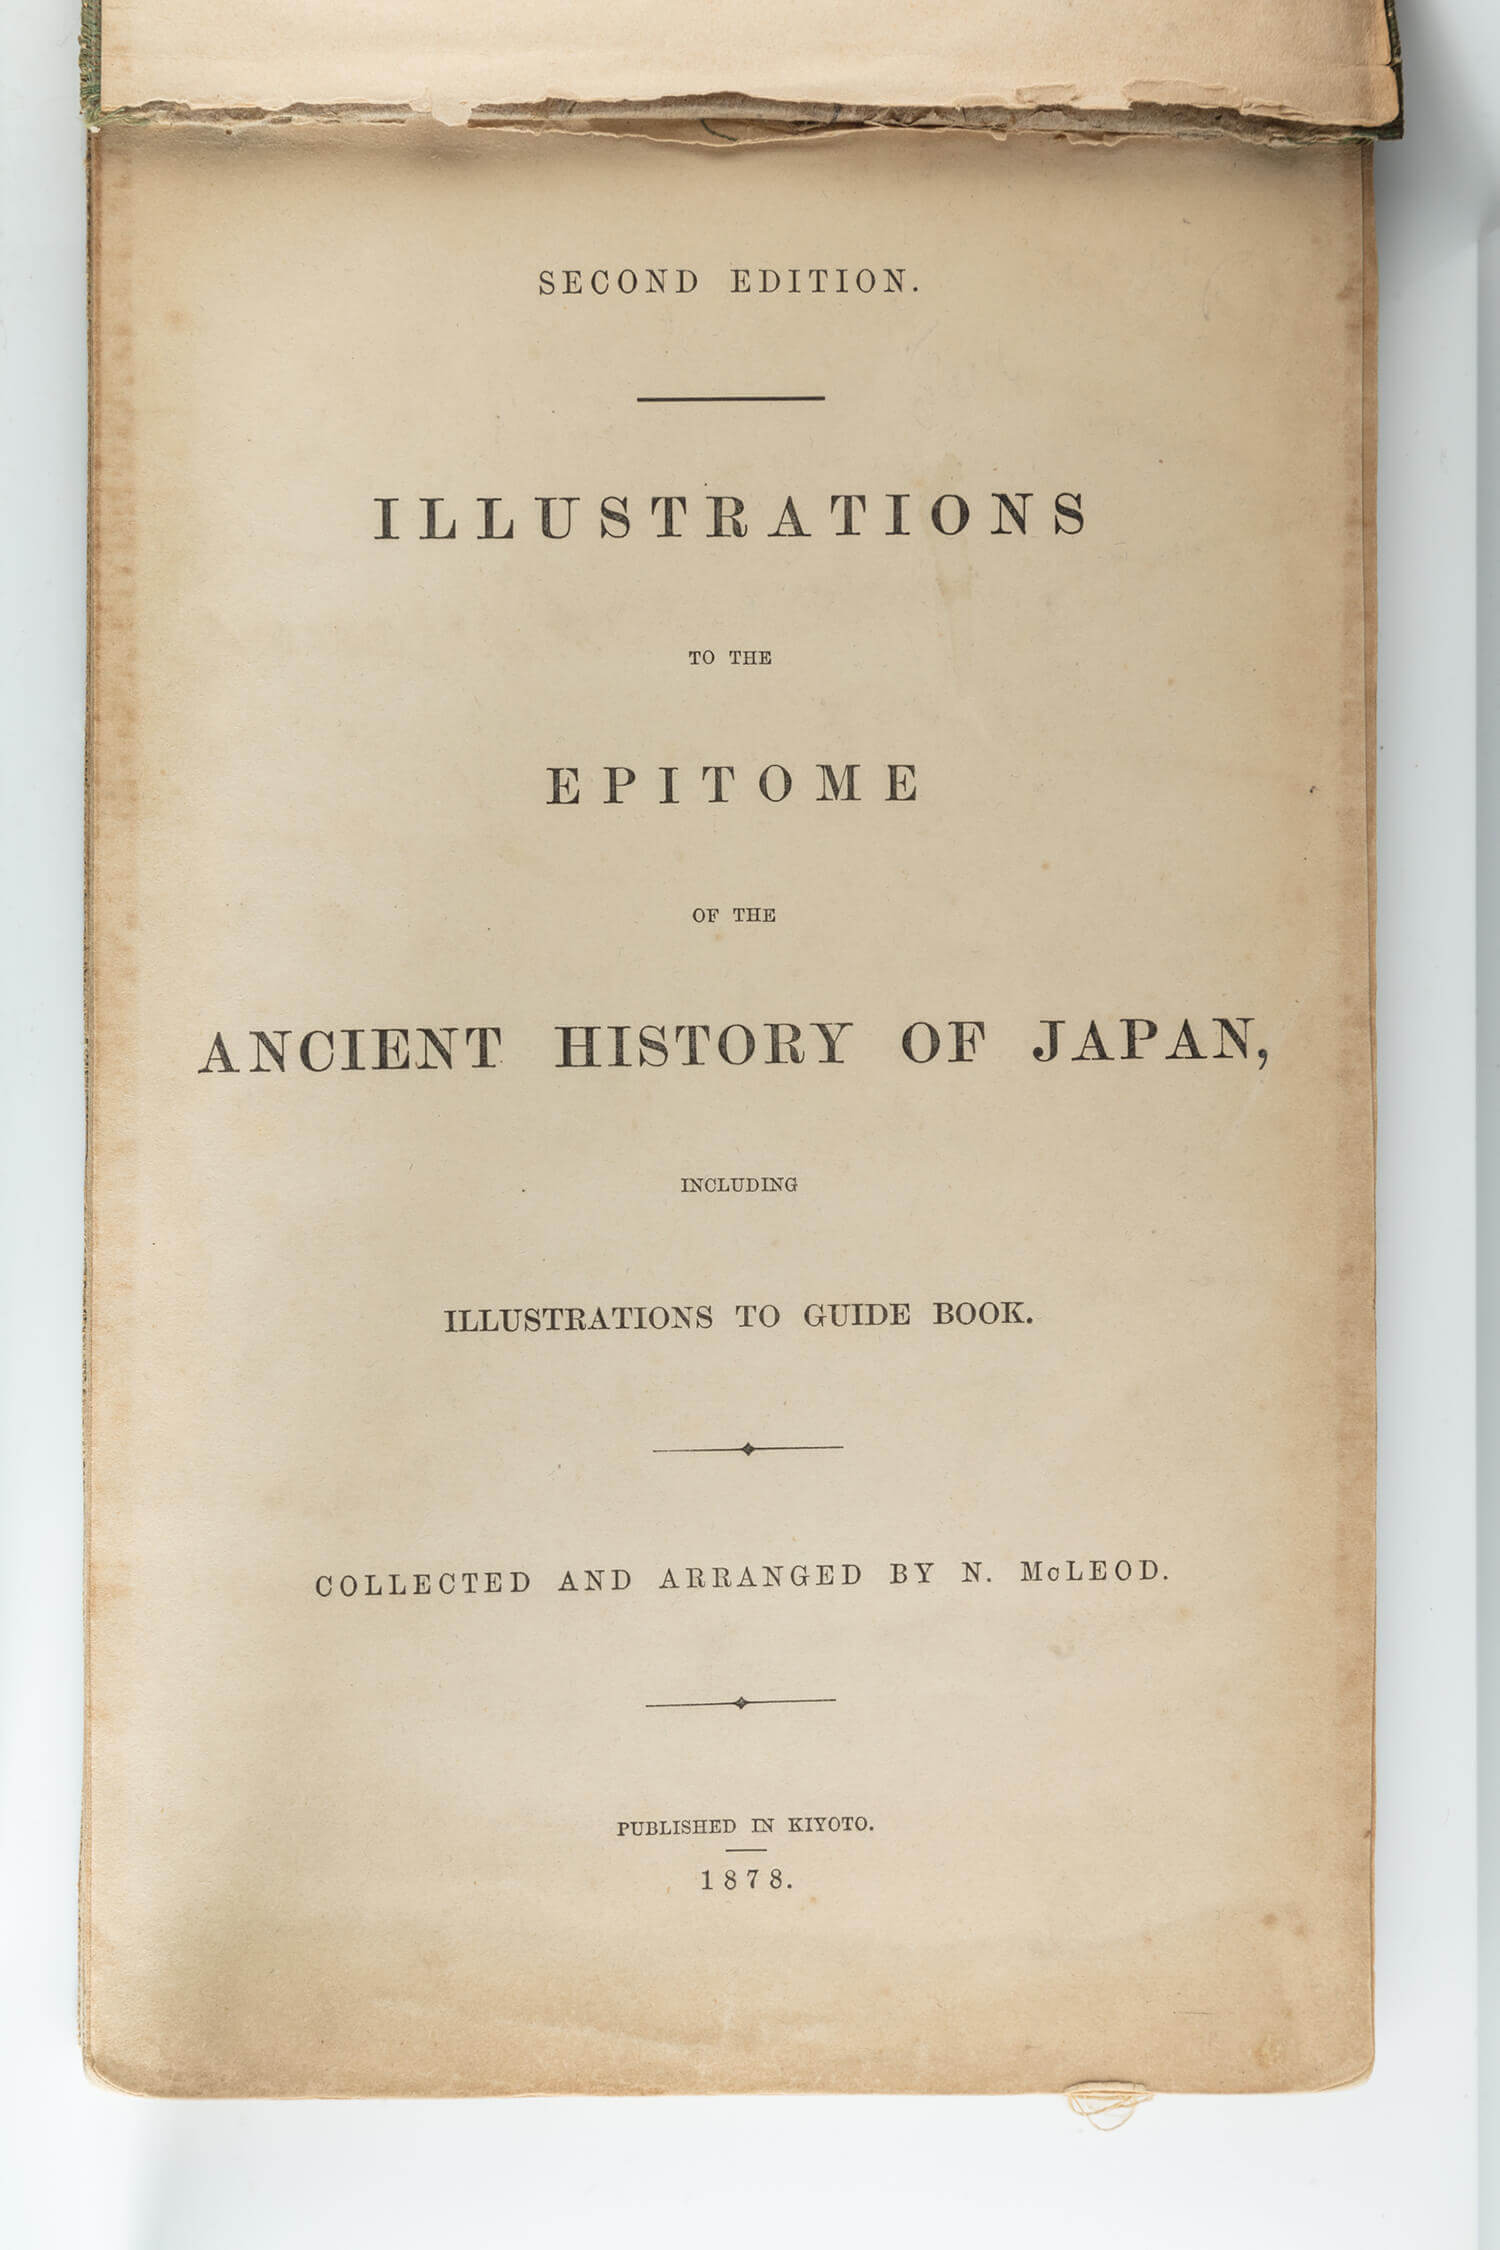 157. A RARE BOOK THAT IDENTIFIES THE JAPANESE SHANDAI CLASS AS DESCENDANTS OF THE LOST TRIBES